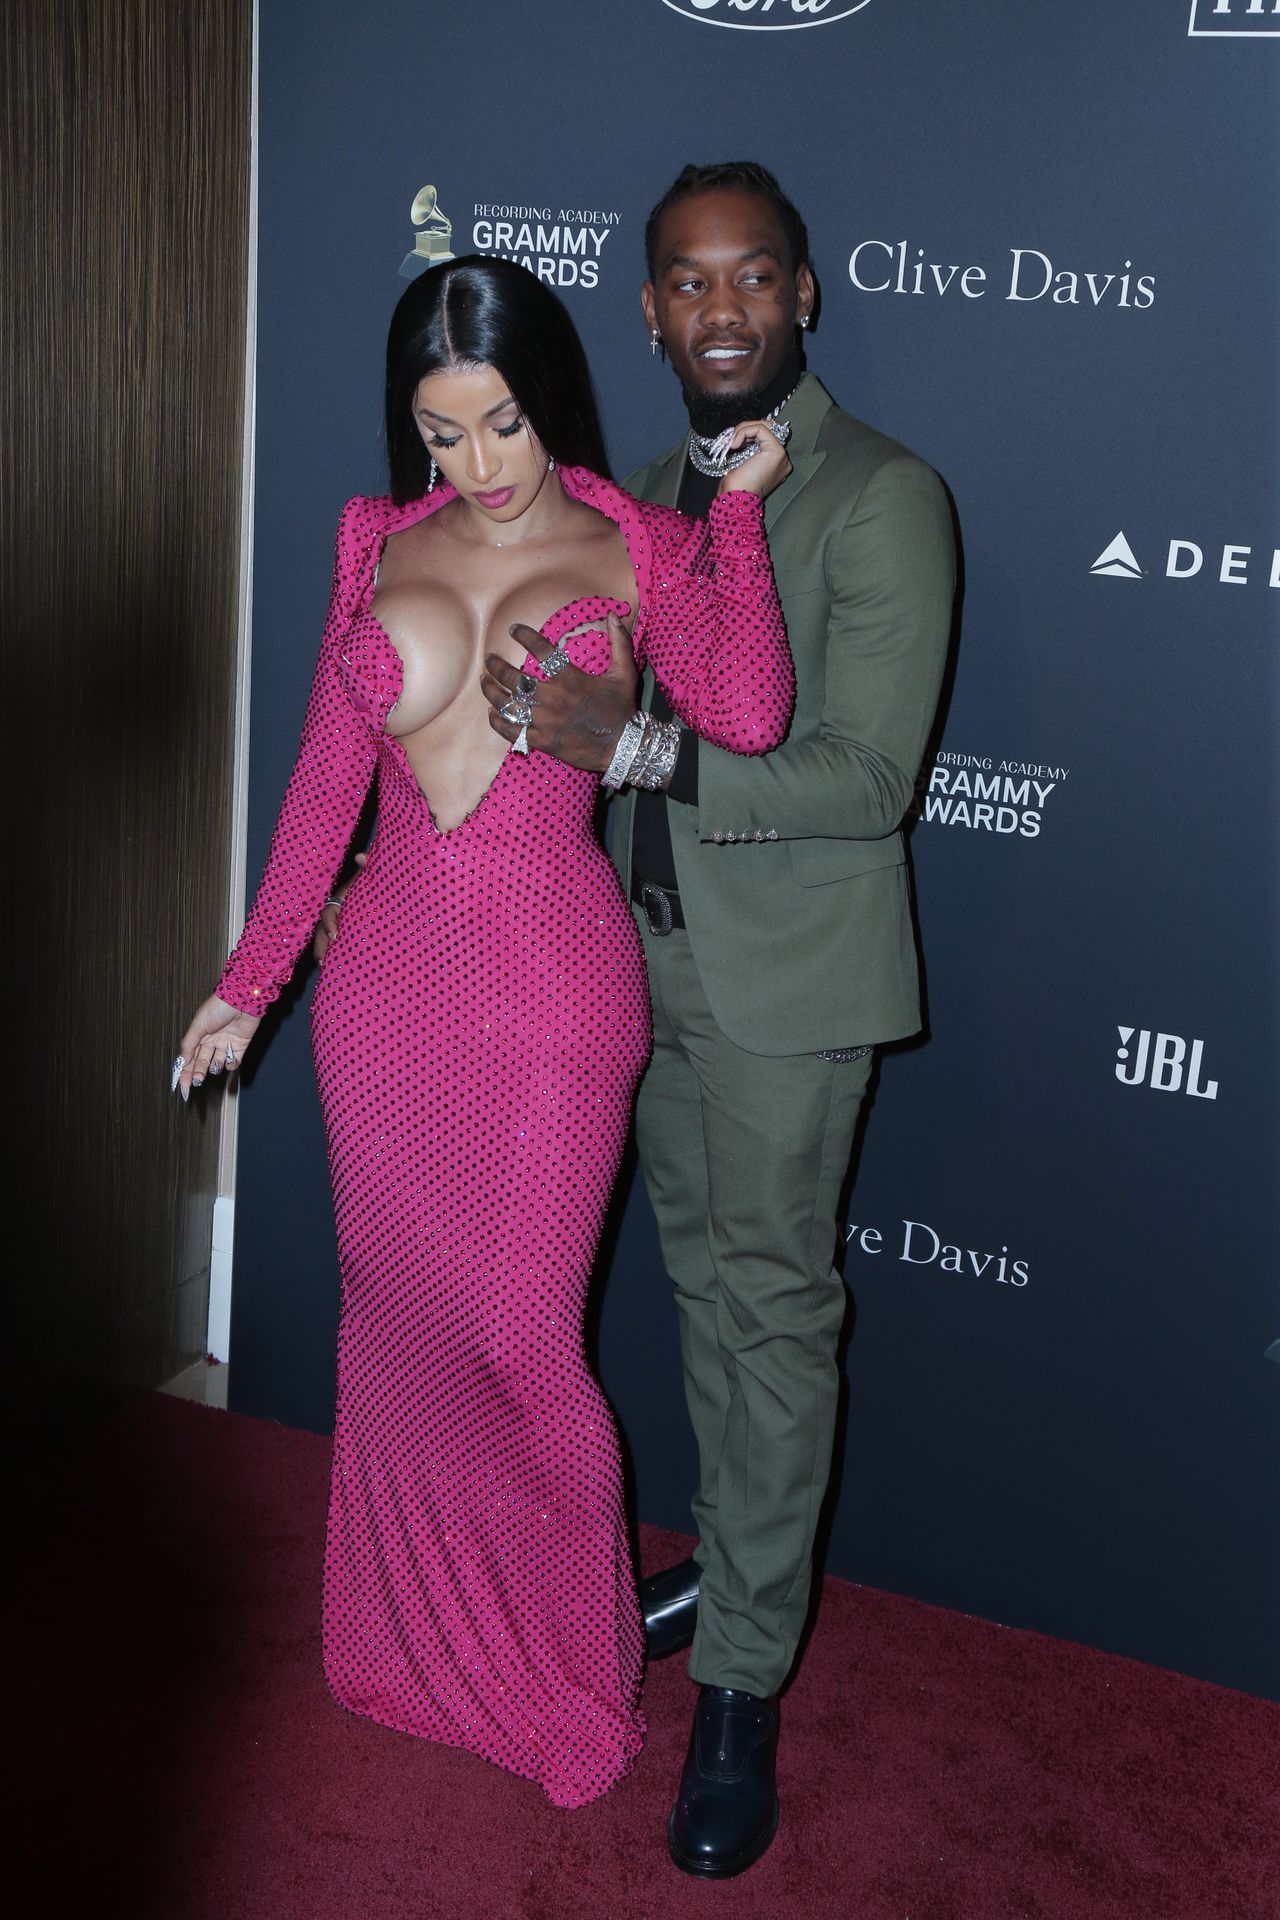 Offset Covers Cardi B’s Boobs To Avoid Wardrobe Malfunction At Clive Davis Pre Grammy Party 0112